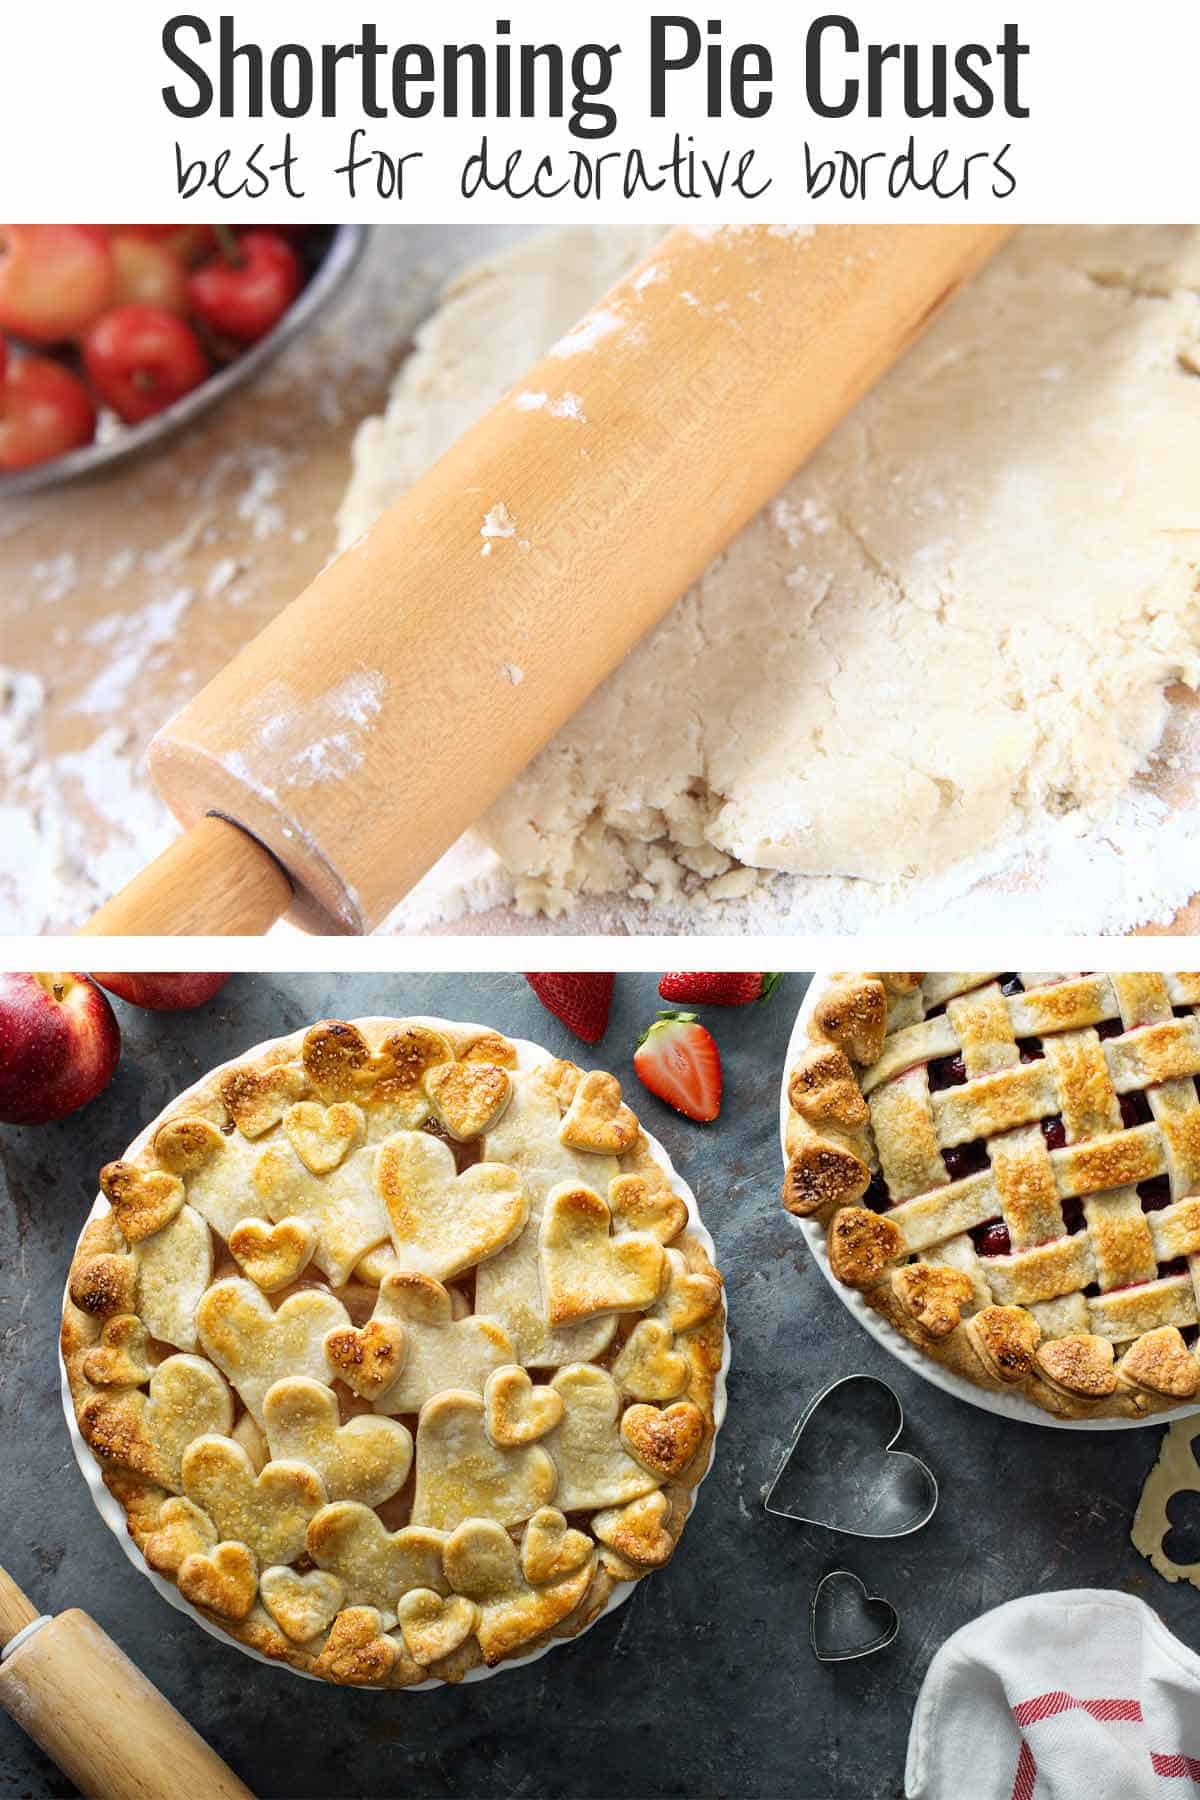 Rolling pin rolling out shortening pie crust. And two baked pies decorated with lattice and hearts made with shortening pie crust.